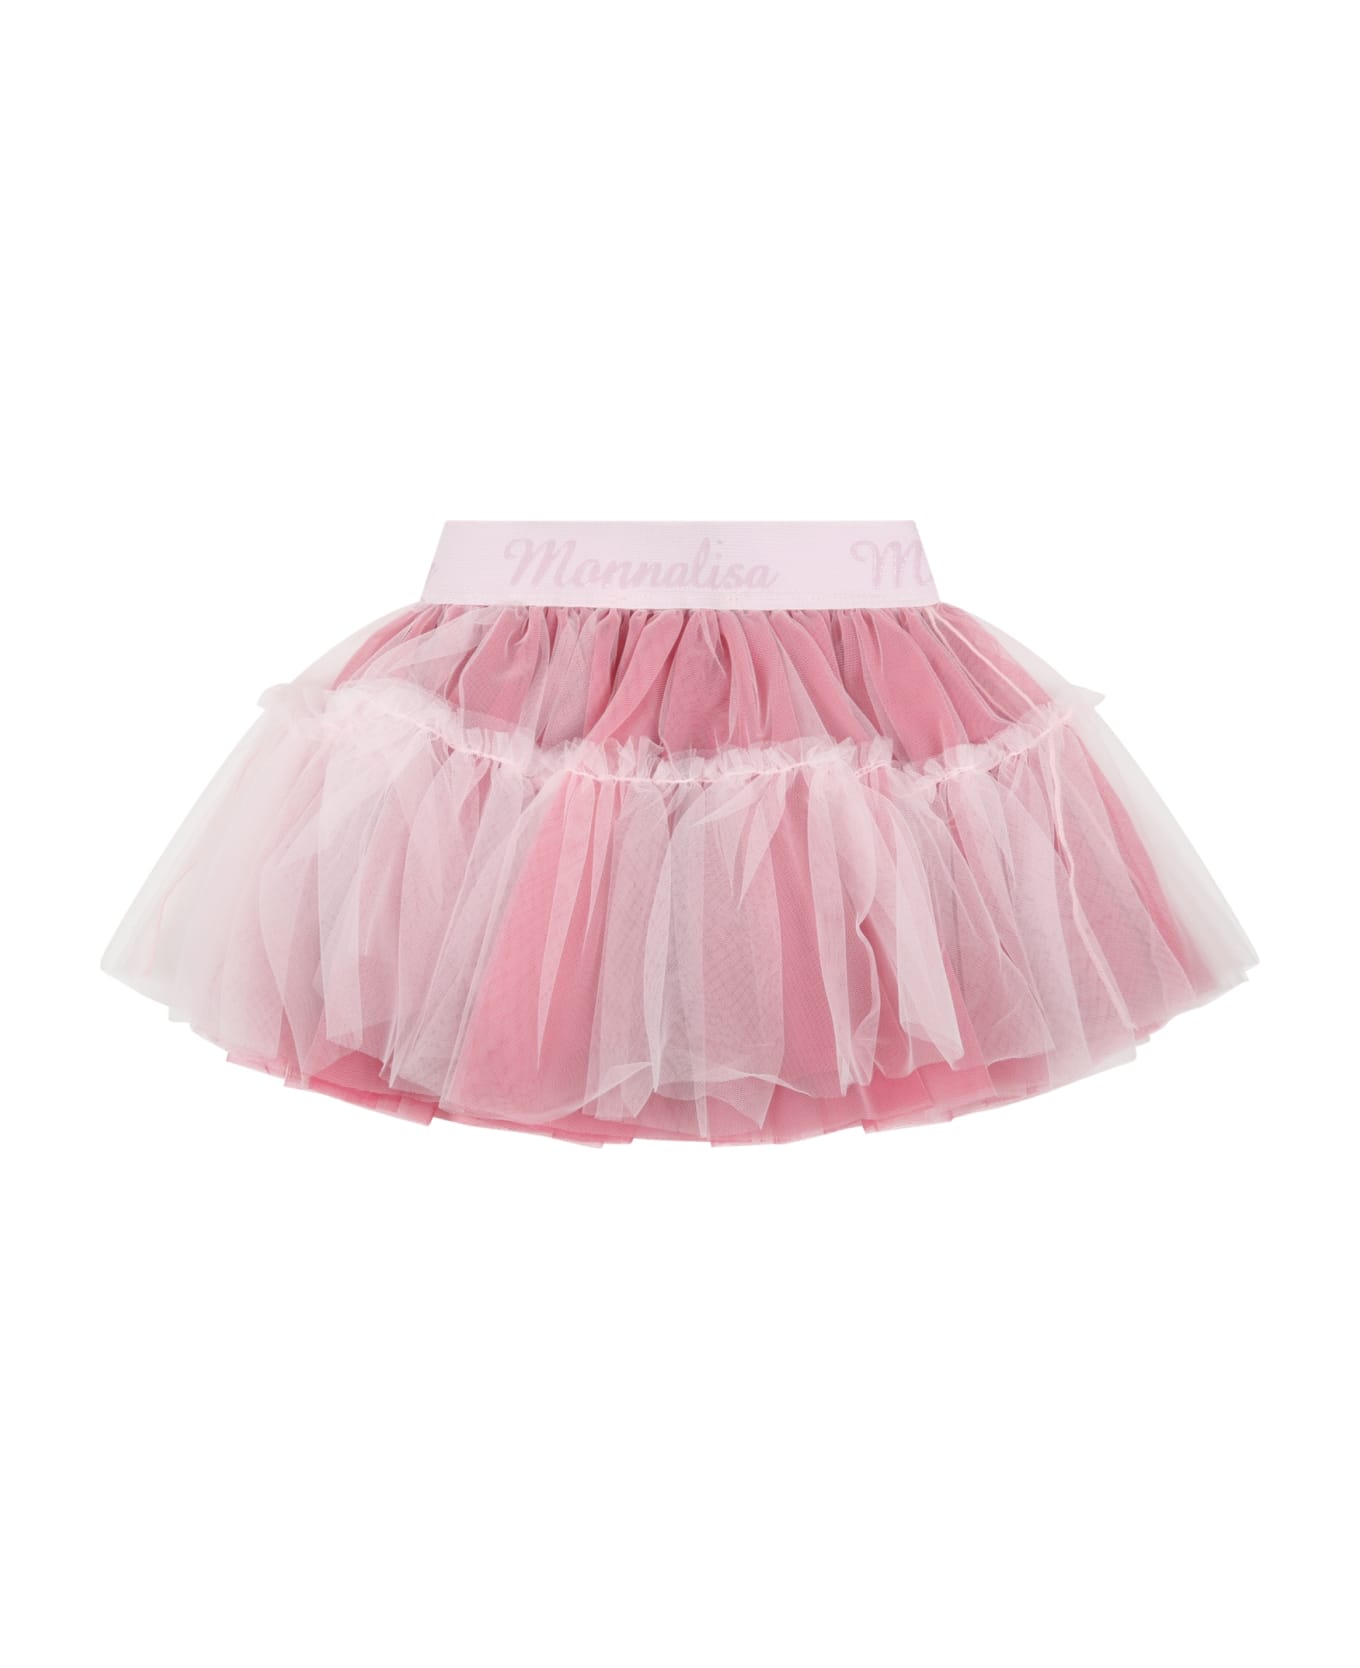 Monnalisa Pink Skirt For Baby Girl With Logo - Pink